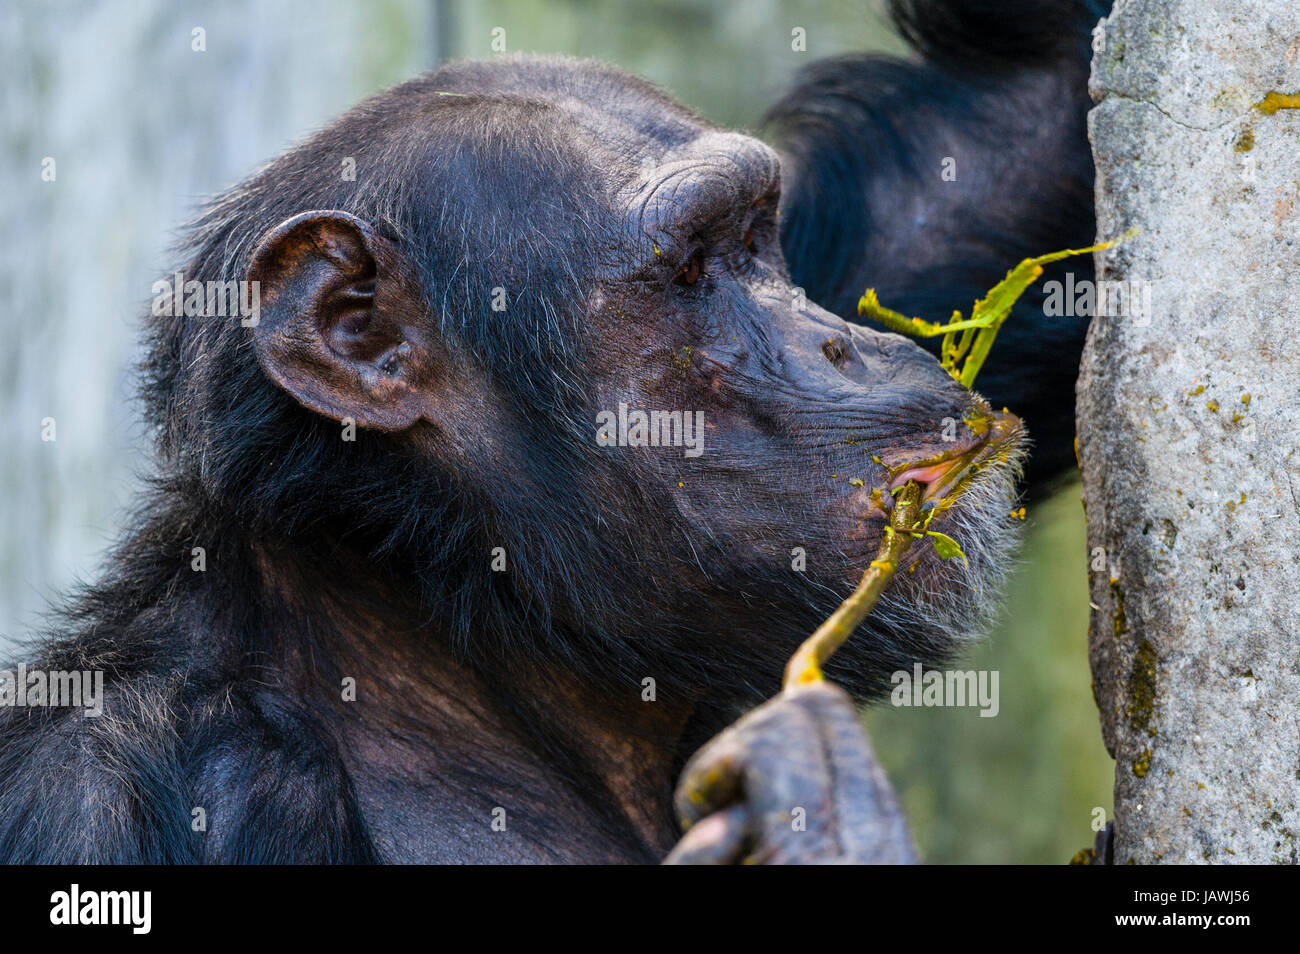 A Chimpanzee using a twig as an tool to collect food from an artificial termite mound. Stock Photo